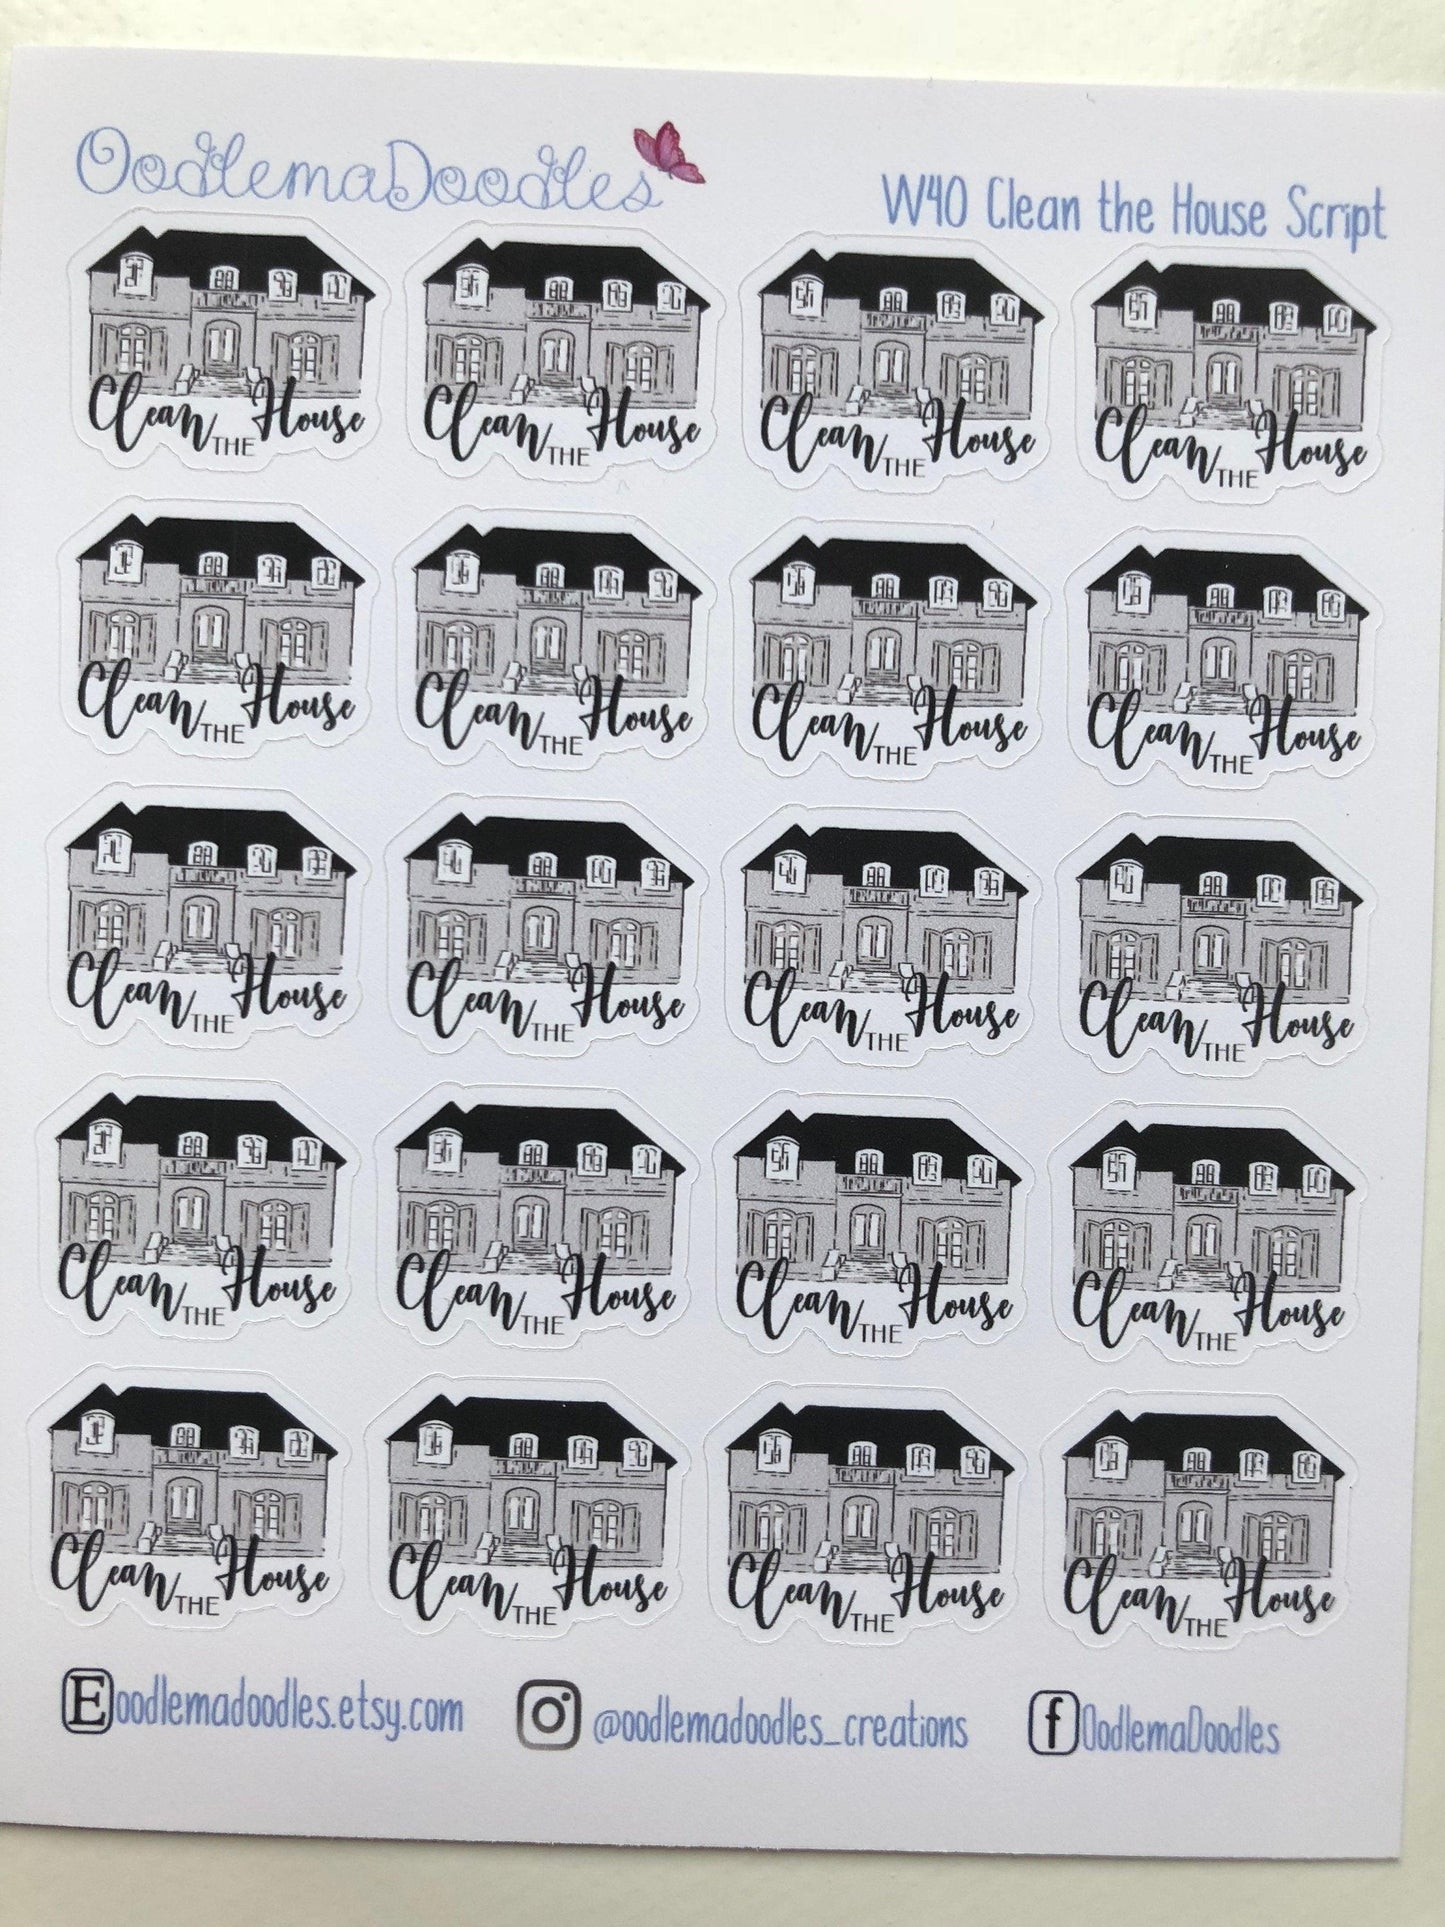 Clean House Script Stickers - oodlemadoodles